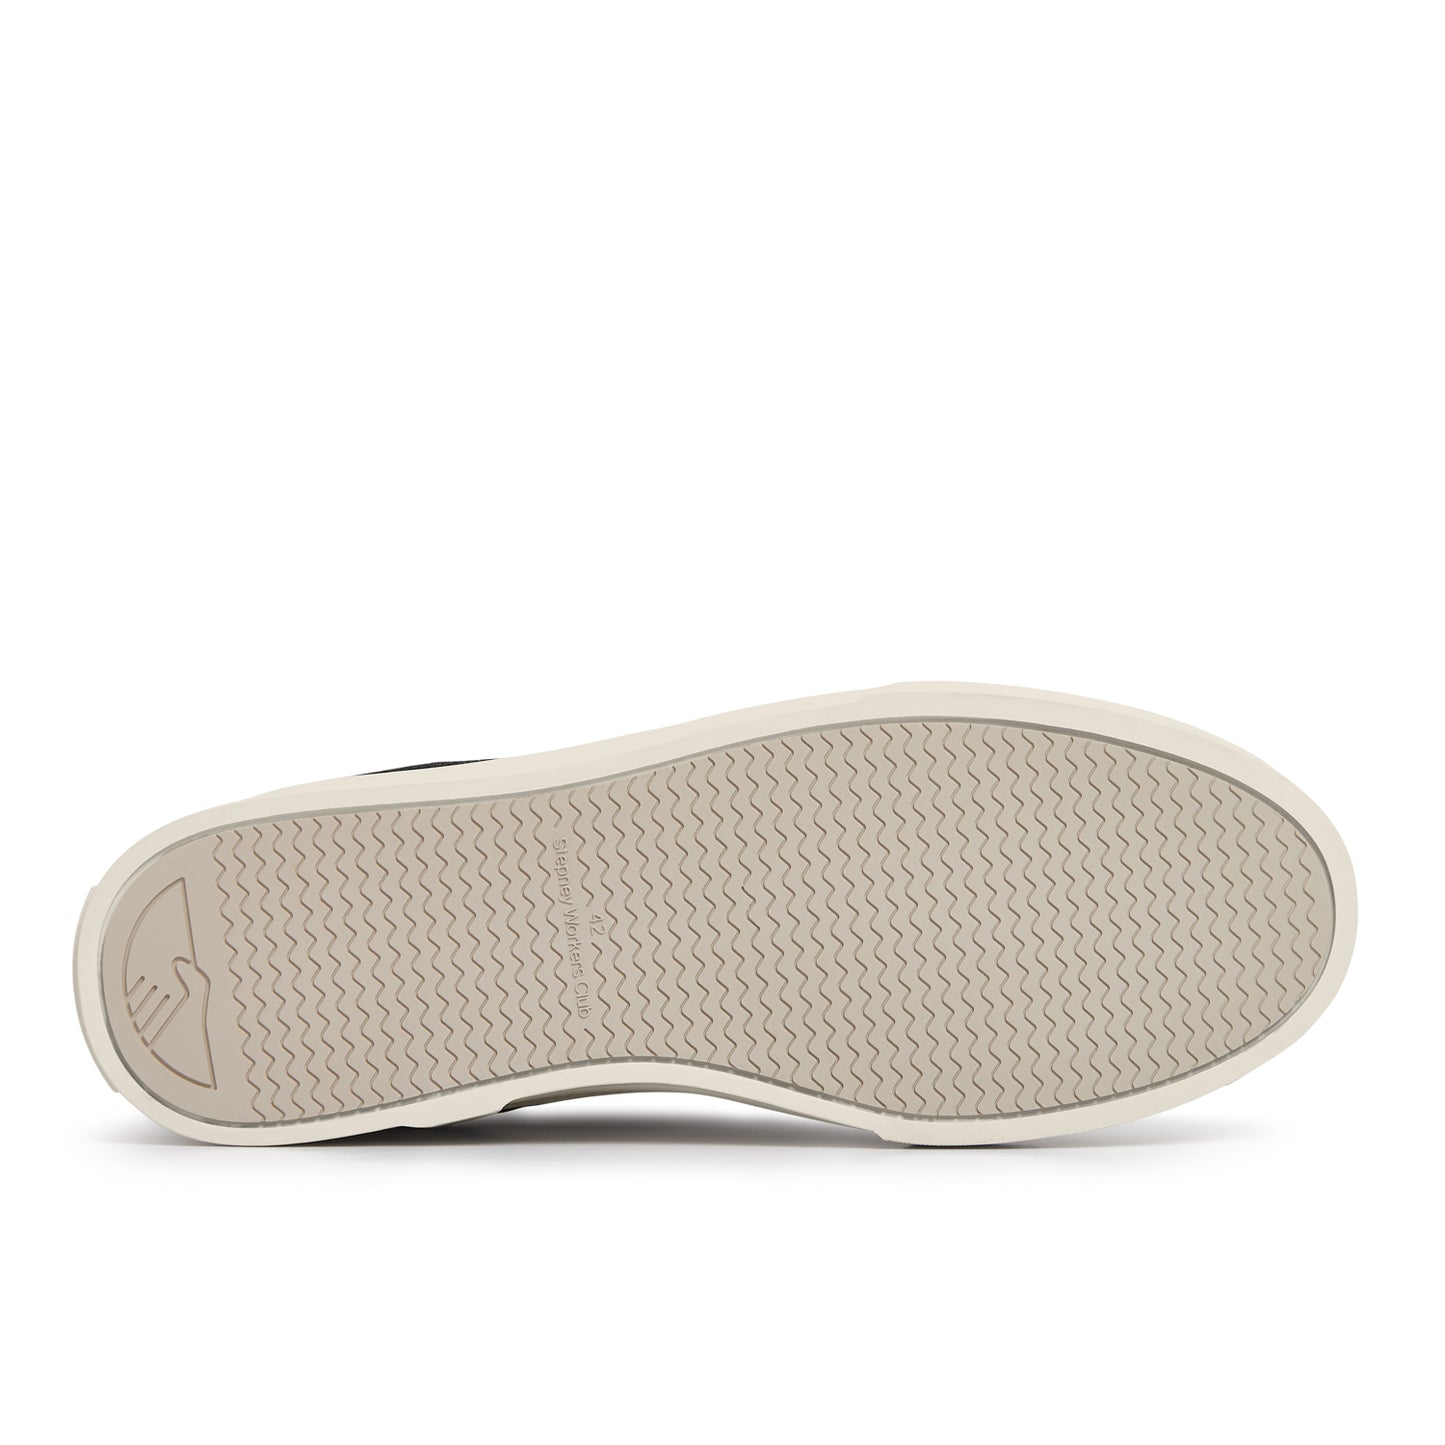 DELLOW CUP SHROOMHANDS SUEDE EARTH-WHITE